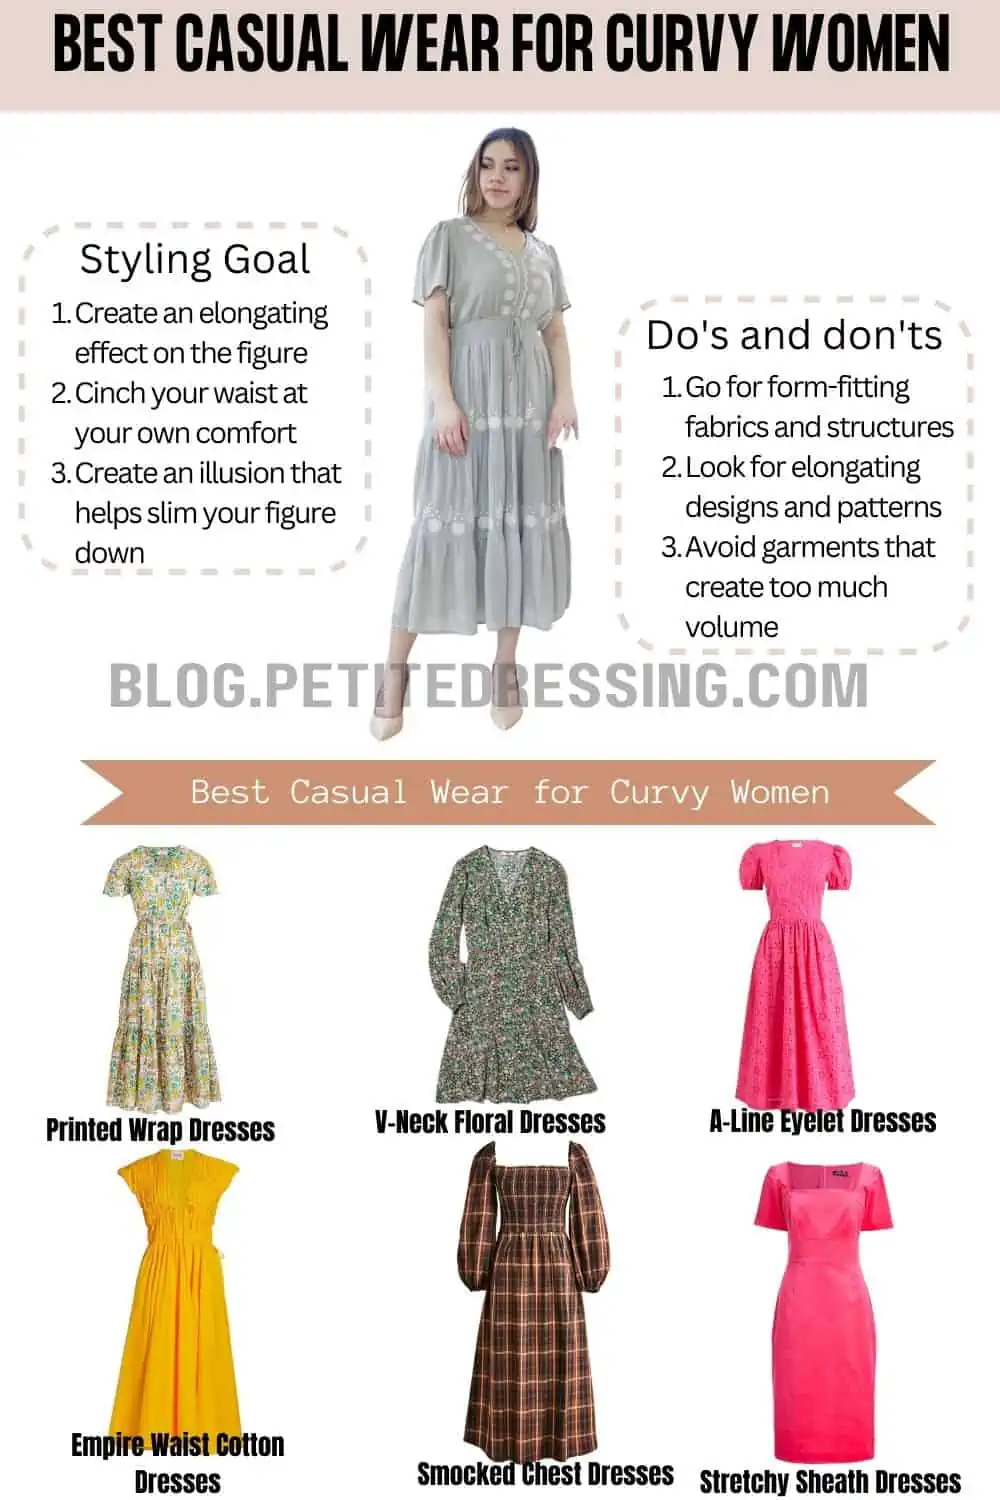 The Casual Dress Guide for Curvy Women - Petite Dressing